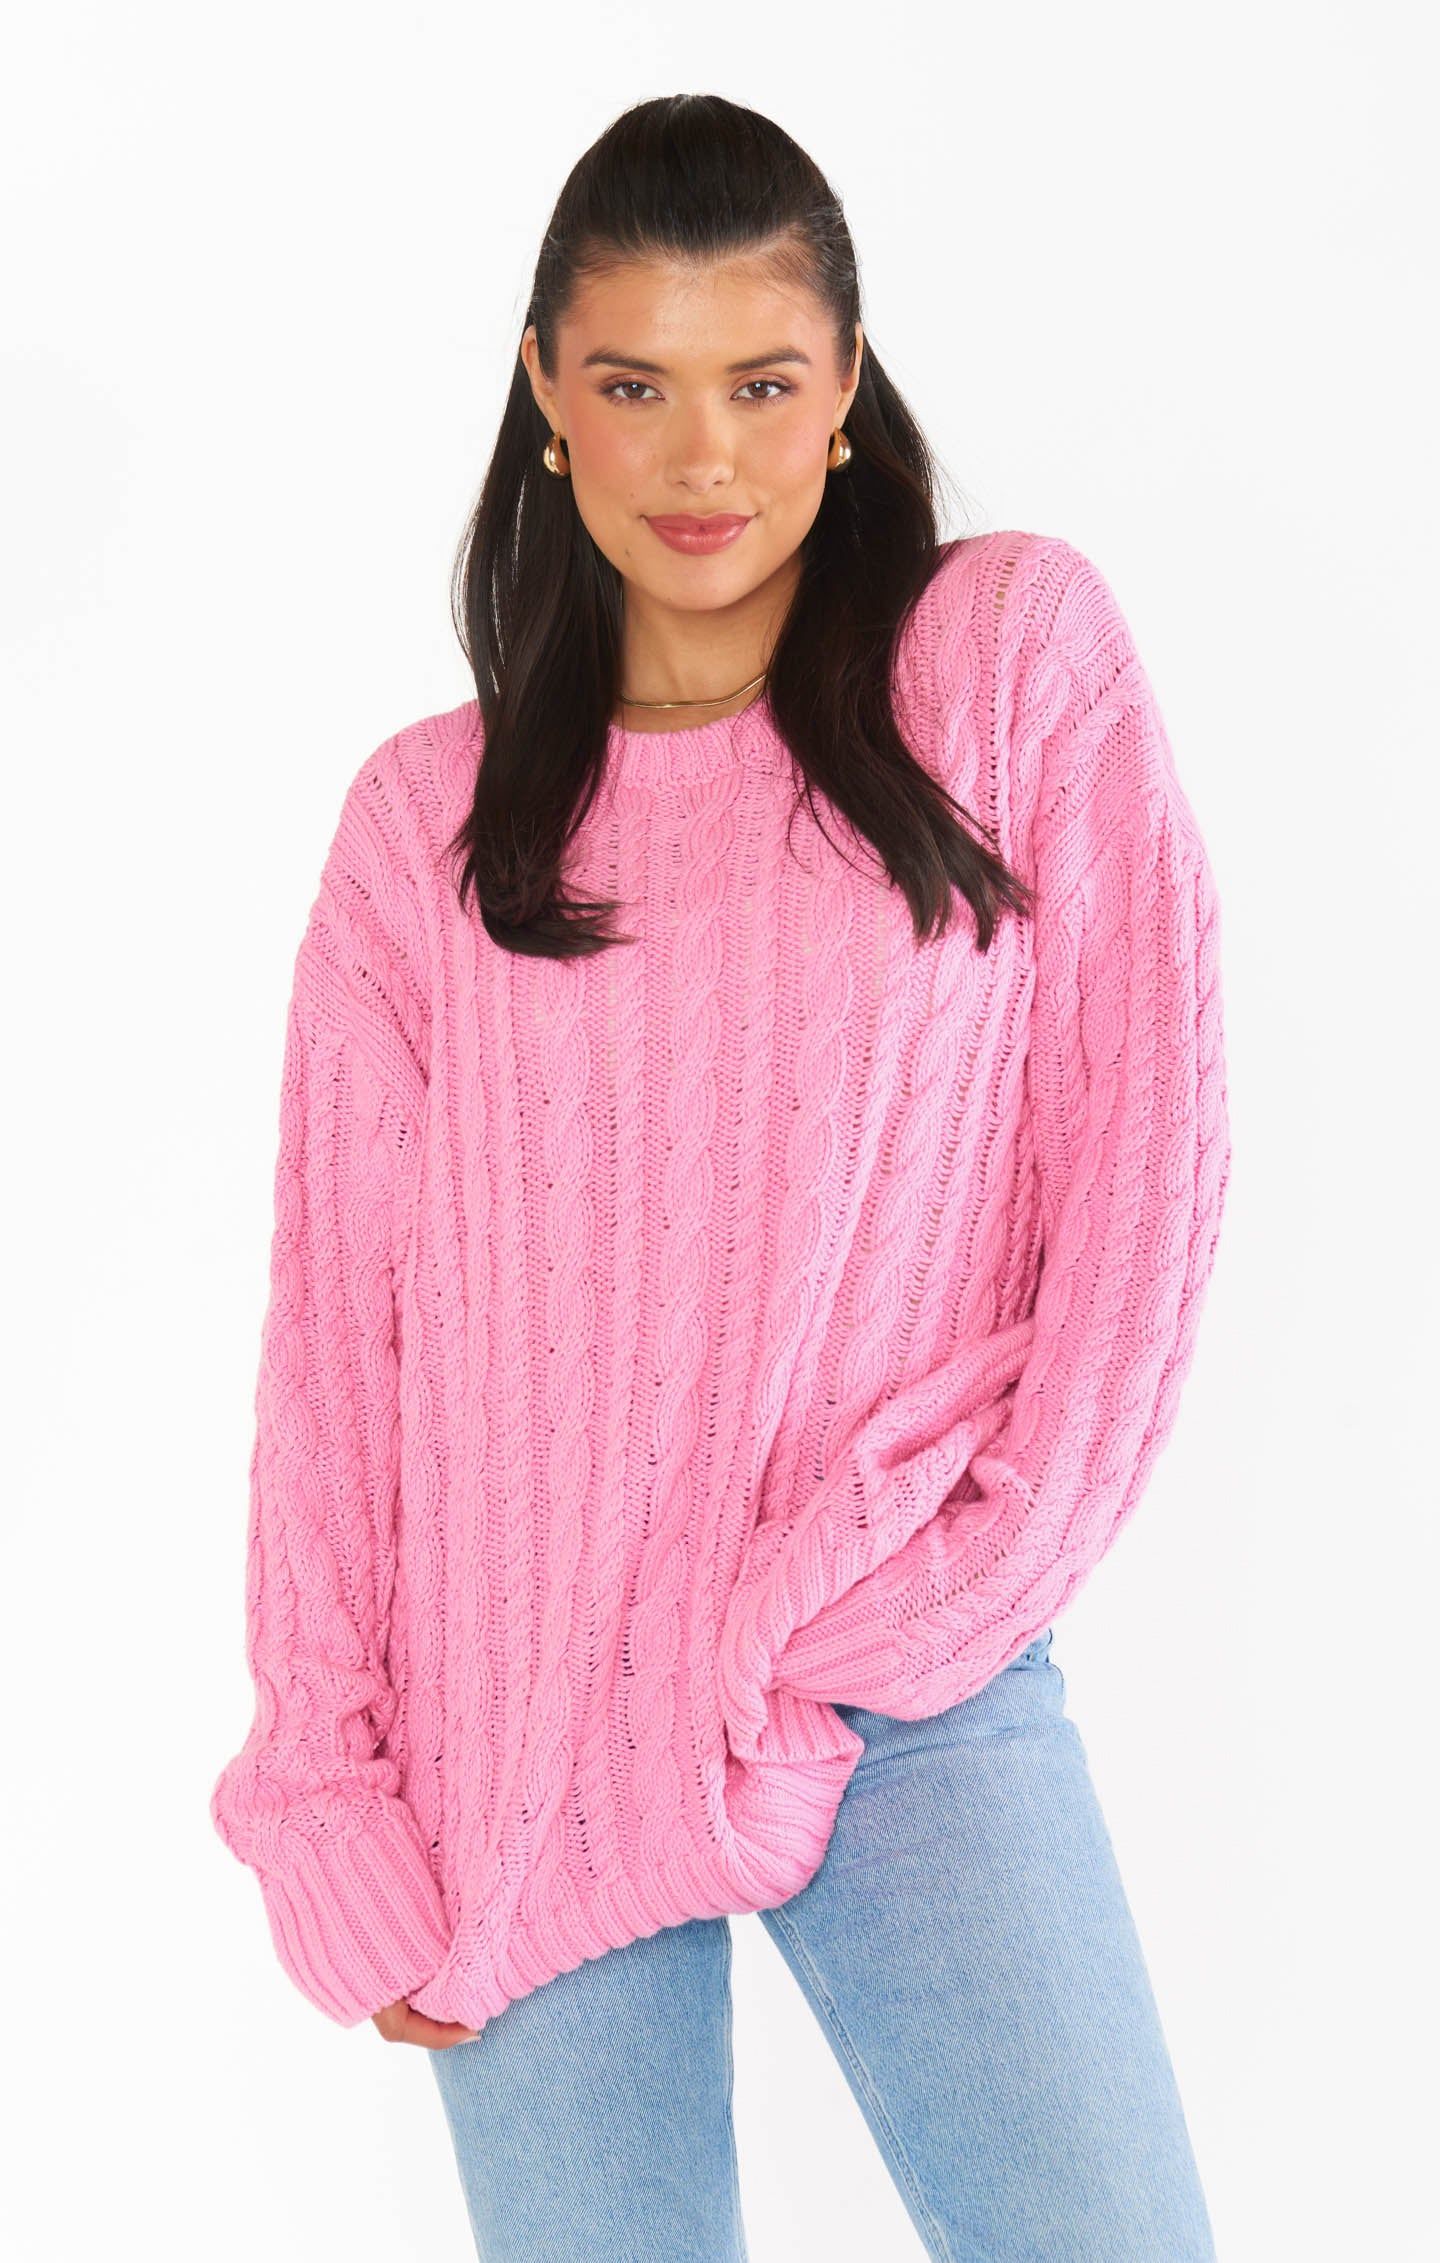 Day to Day Tunic Sweater | Show Me Your Mumu